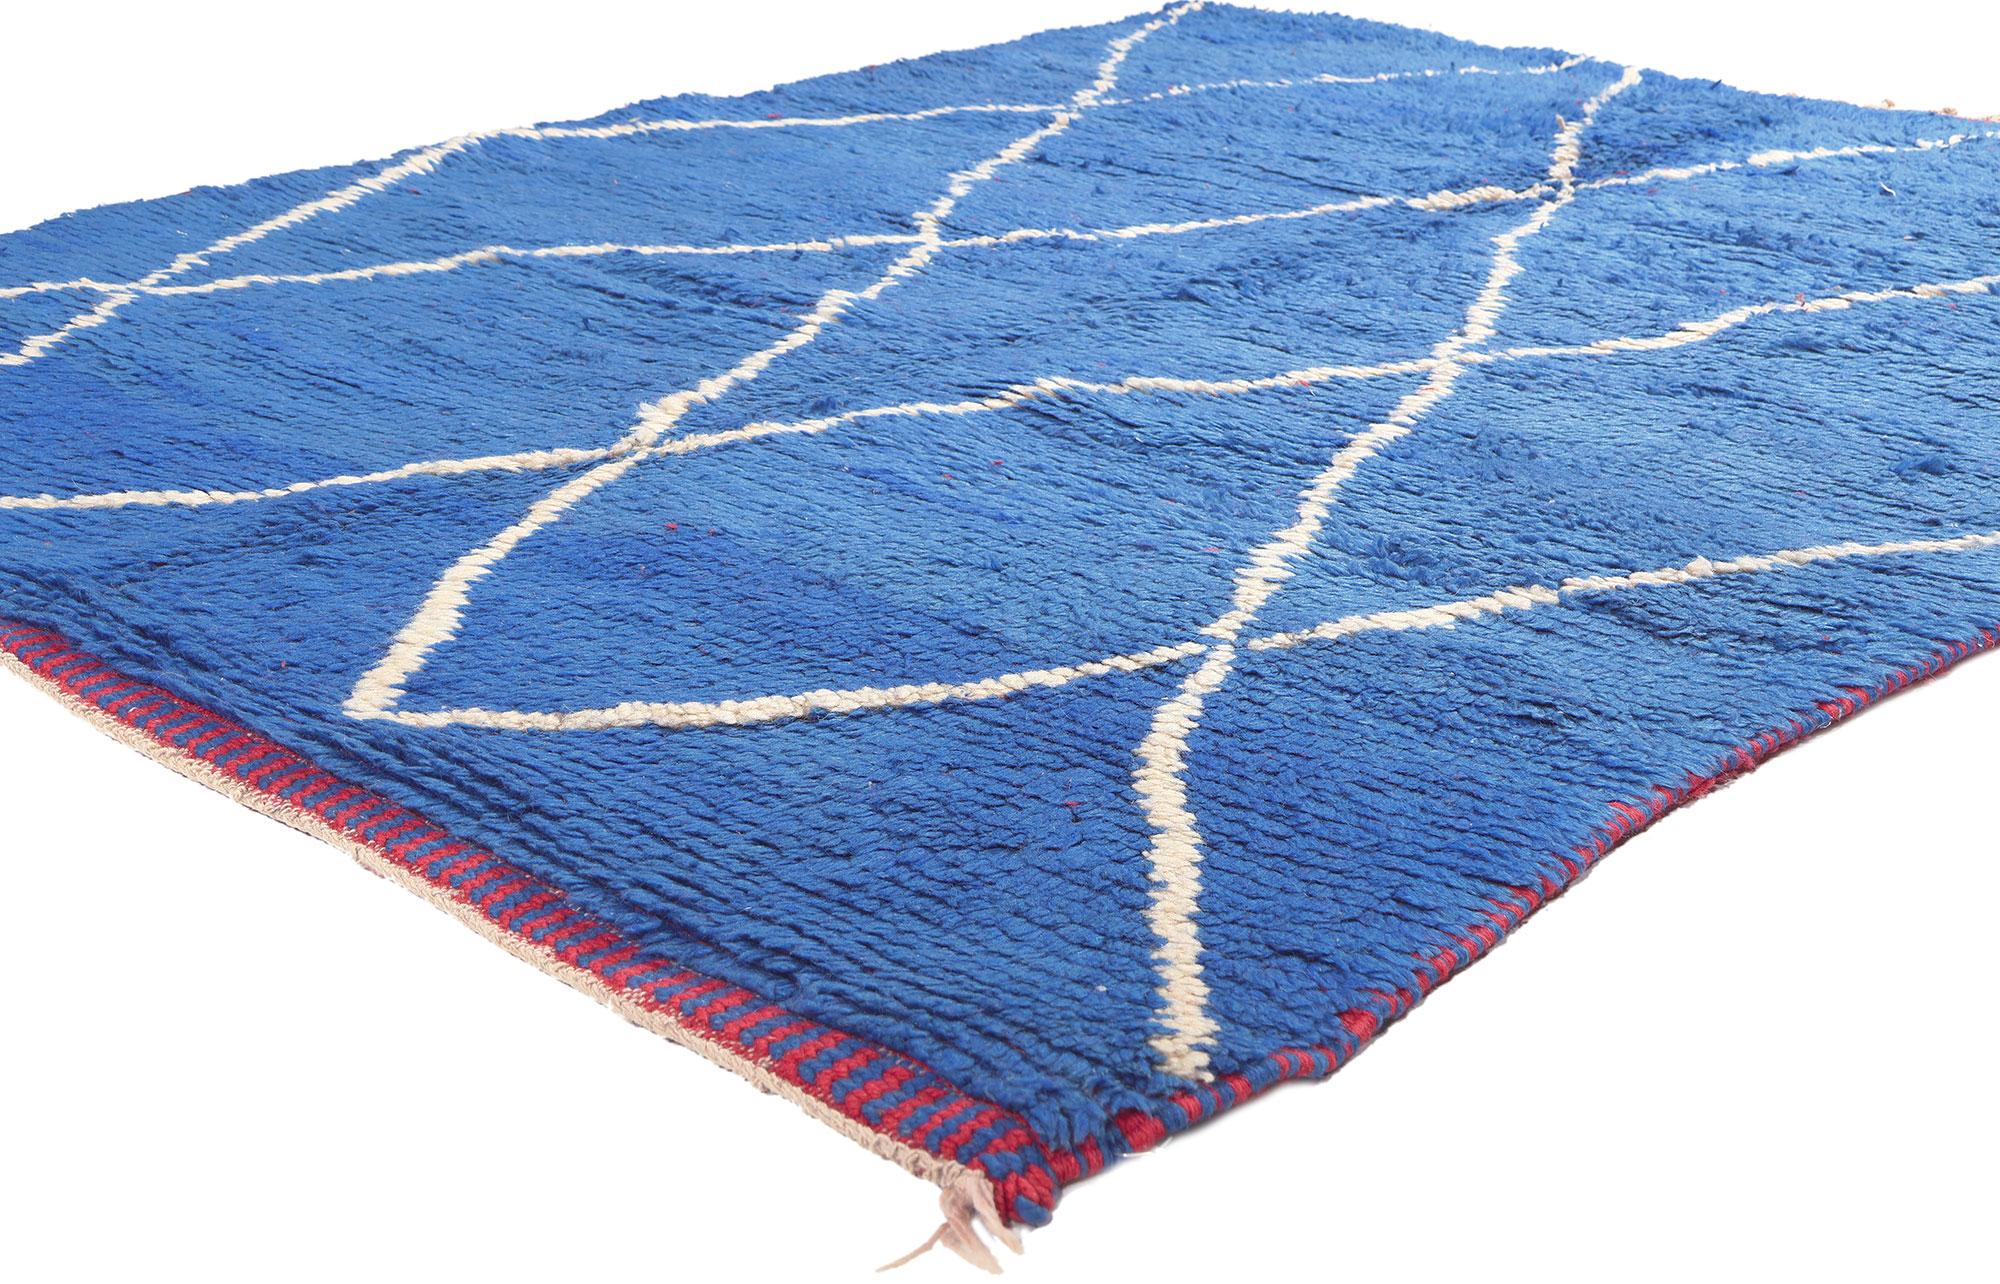 20531 Reversible Red and Blue Moroccan Rug, 05'03 x 06'10. 
Experience the vibrant spectrum from ravishing red to calm and casual blue in this reversible Berber Moroccan rug, adorned with a modern tribal flair that exudes boldness and sleek fashion.